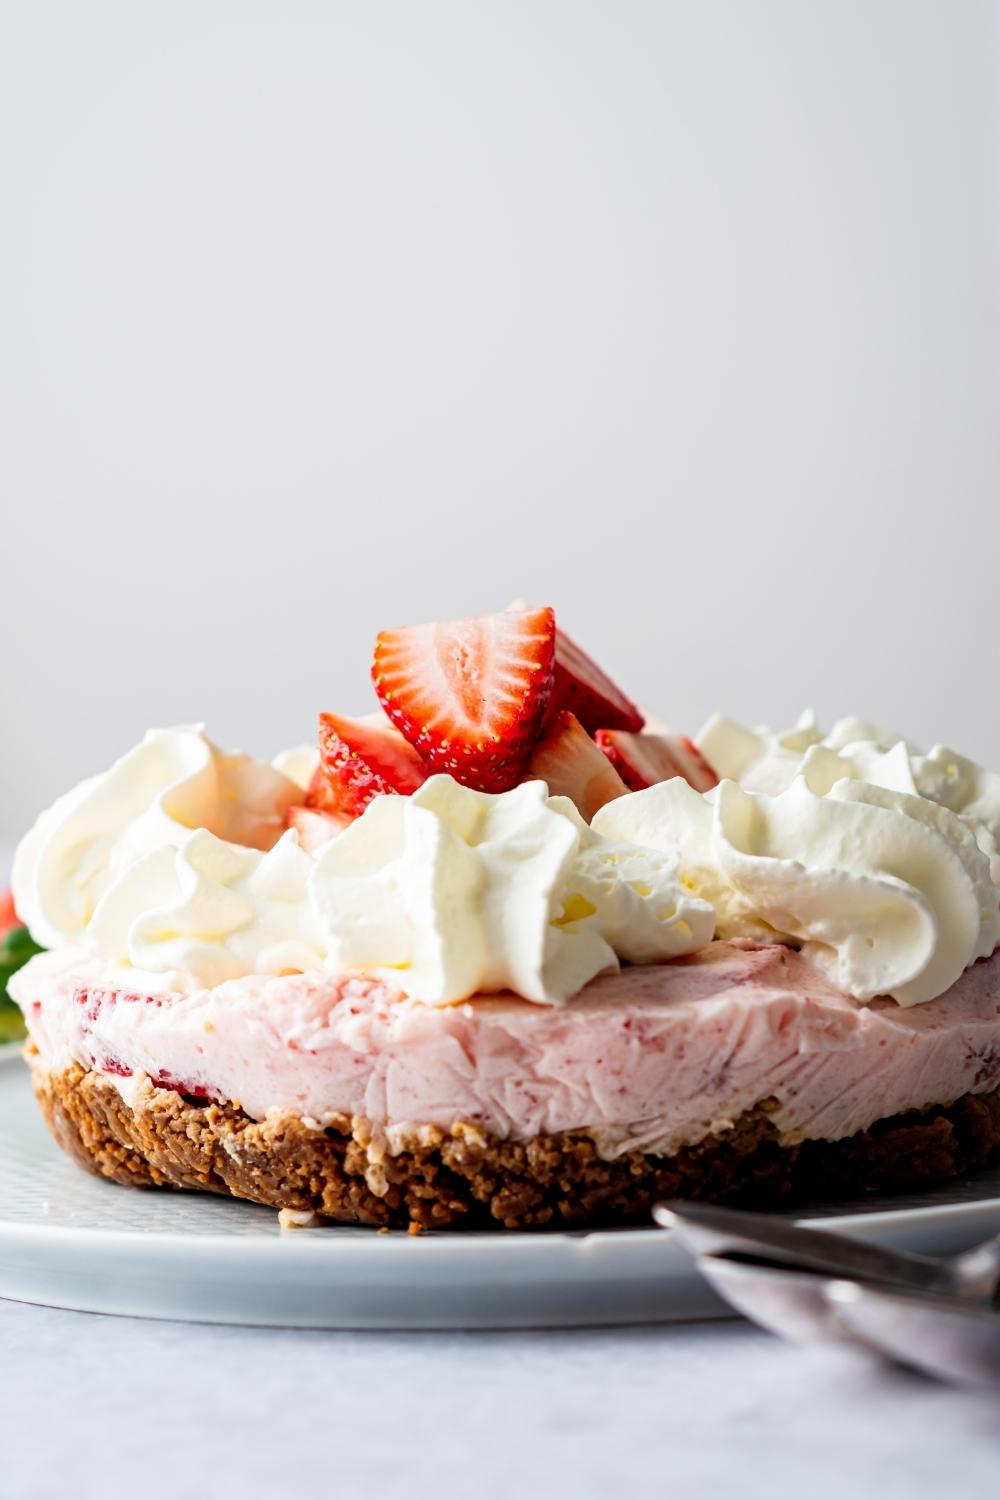 A no bake strawberry pie that is on a plate.